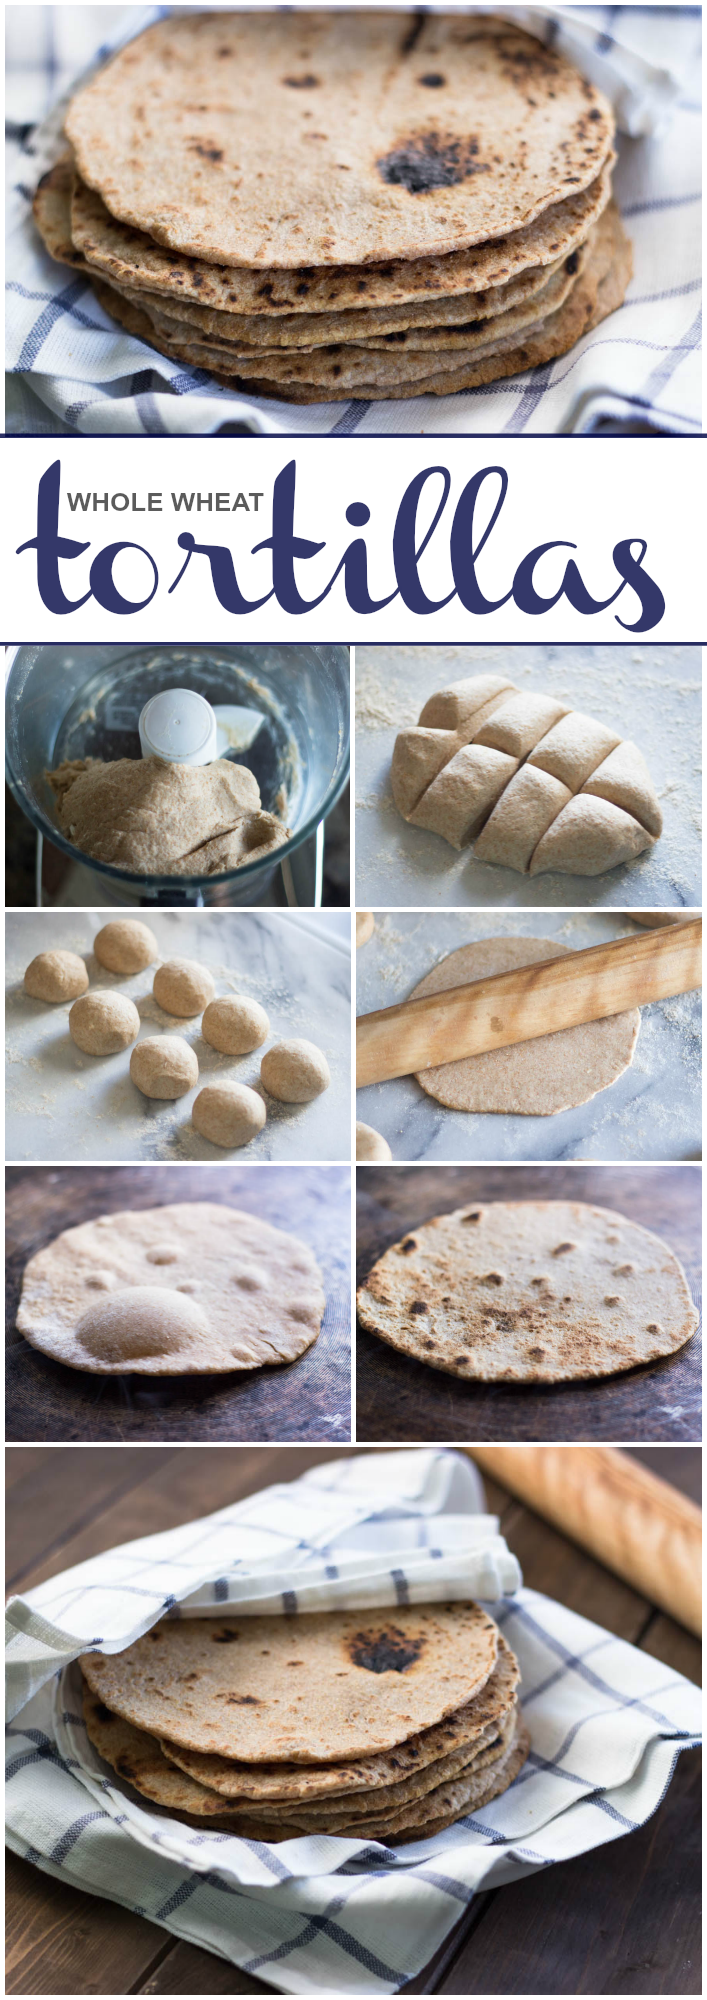 How to Make Homemade Whole Wheat Tortillas #mexican #easy #healthy #recipe